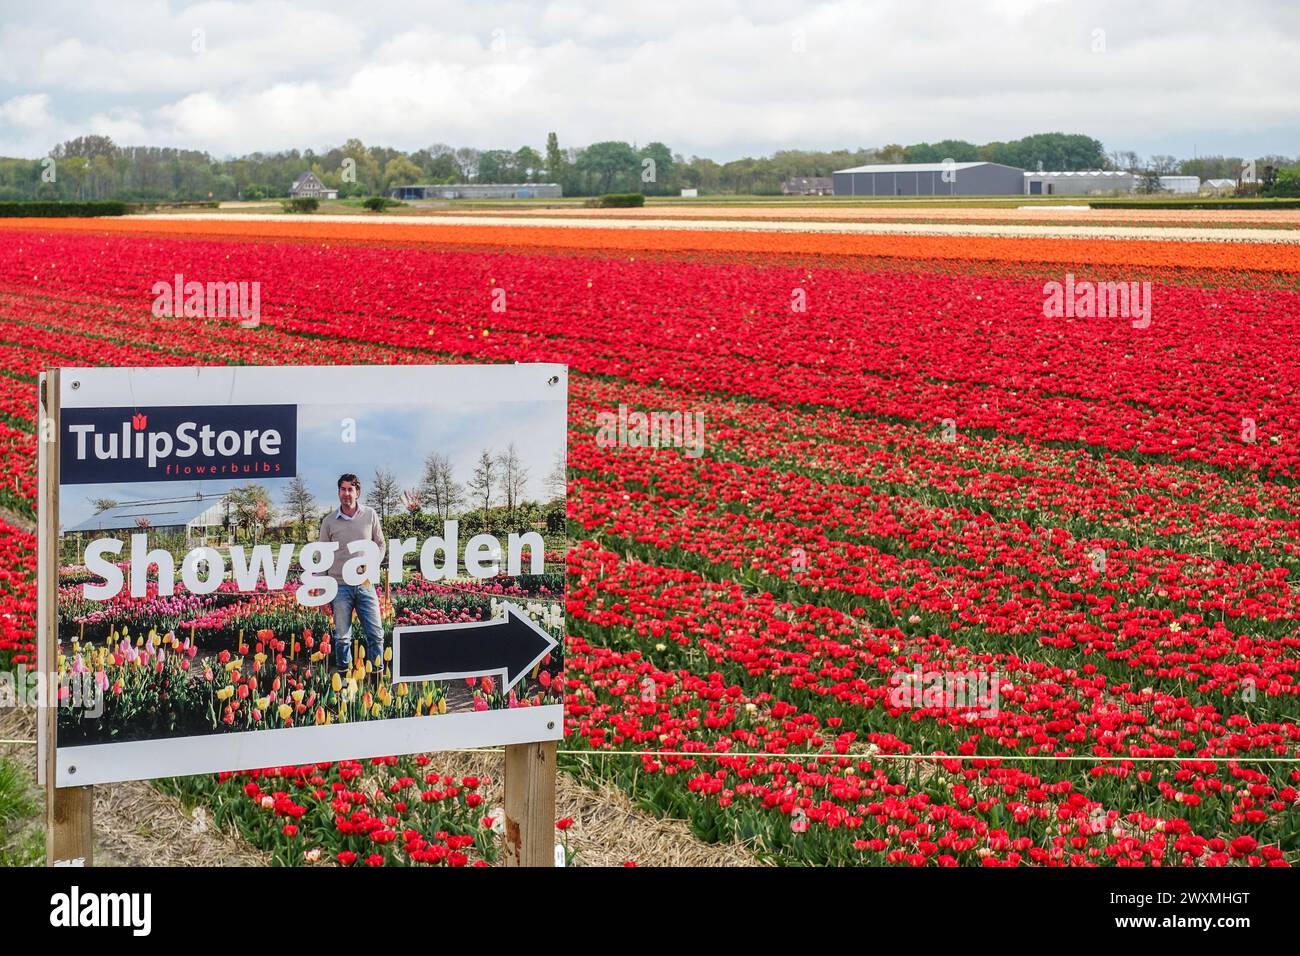 Vibrant red tulips blooming in a dense floral field, behind a Show garden sign, in the farming fields in the flower bulb region, Netherlands Stock Photo